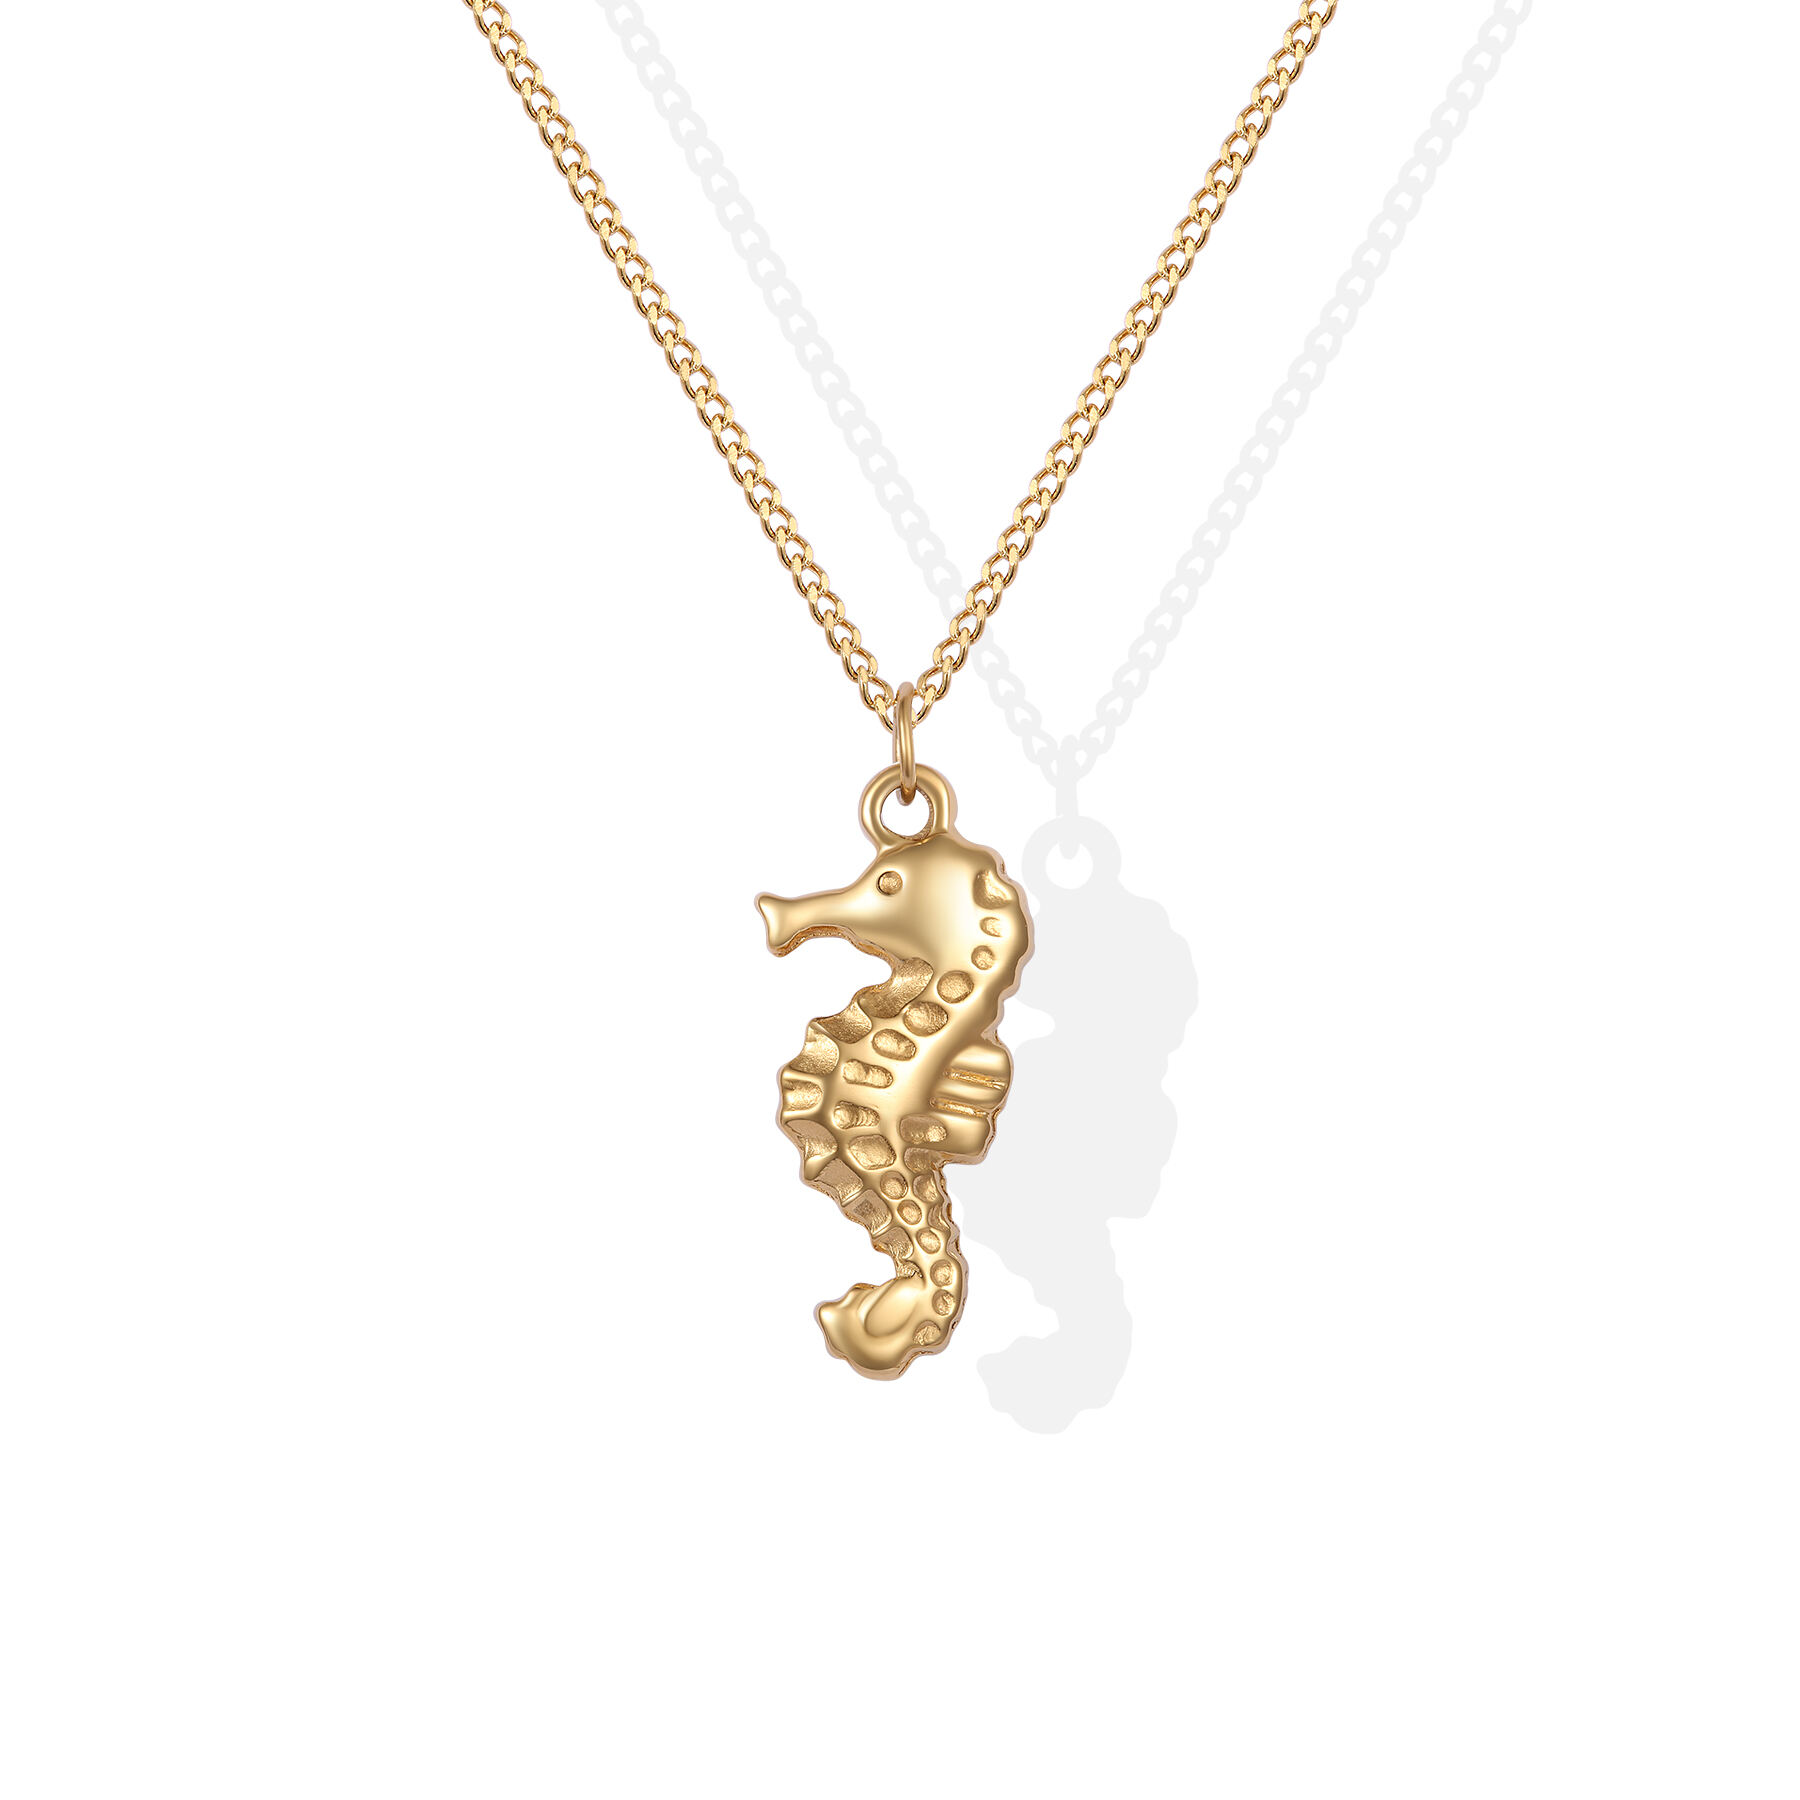 Fashion design 18k gold plated casting seahorse pendant necklace